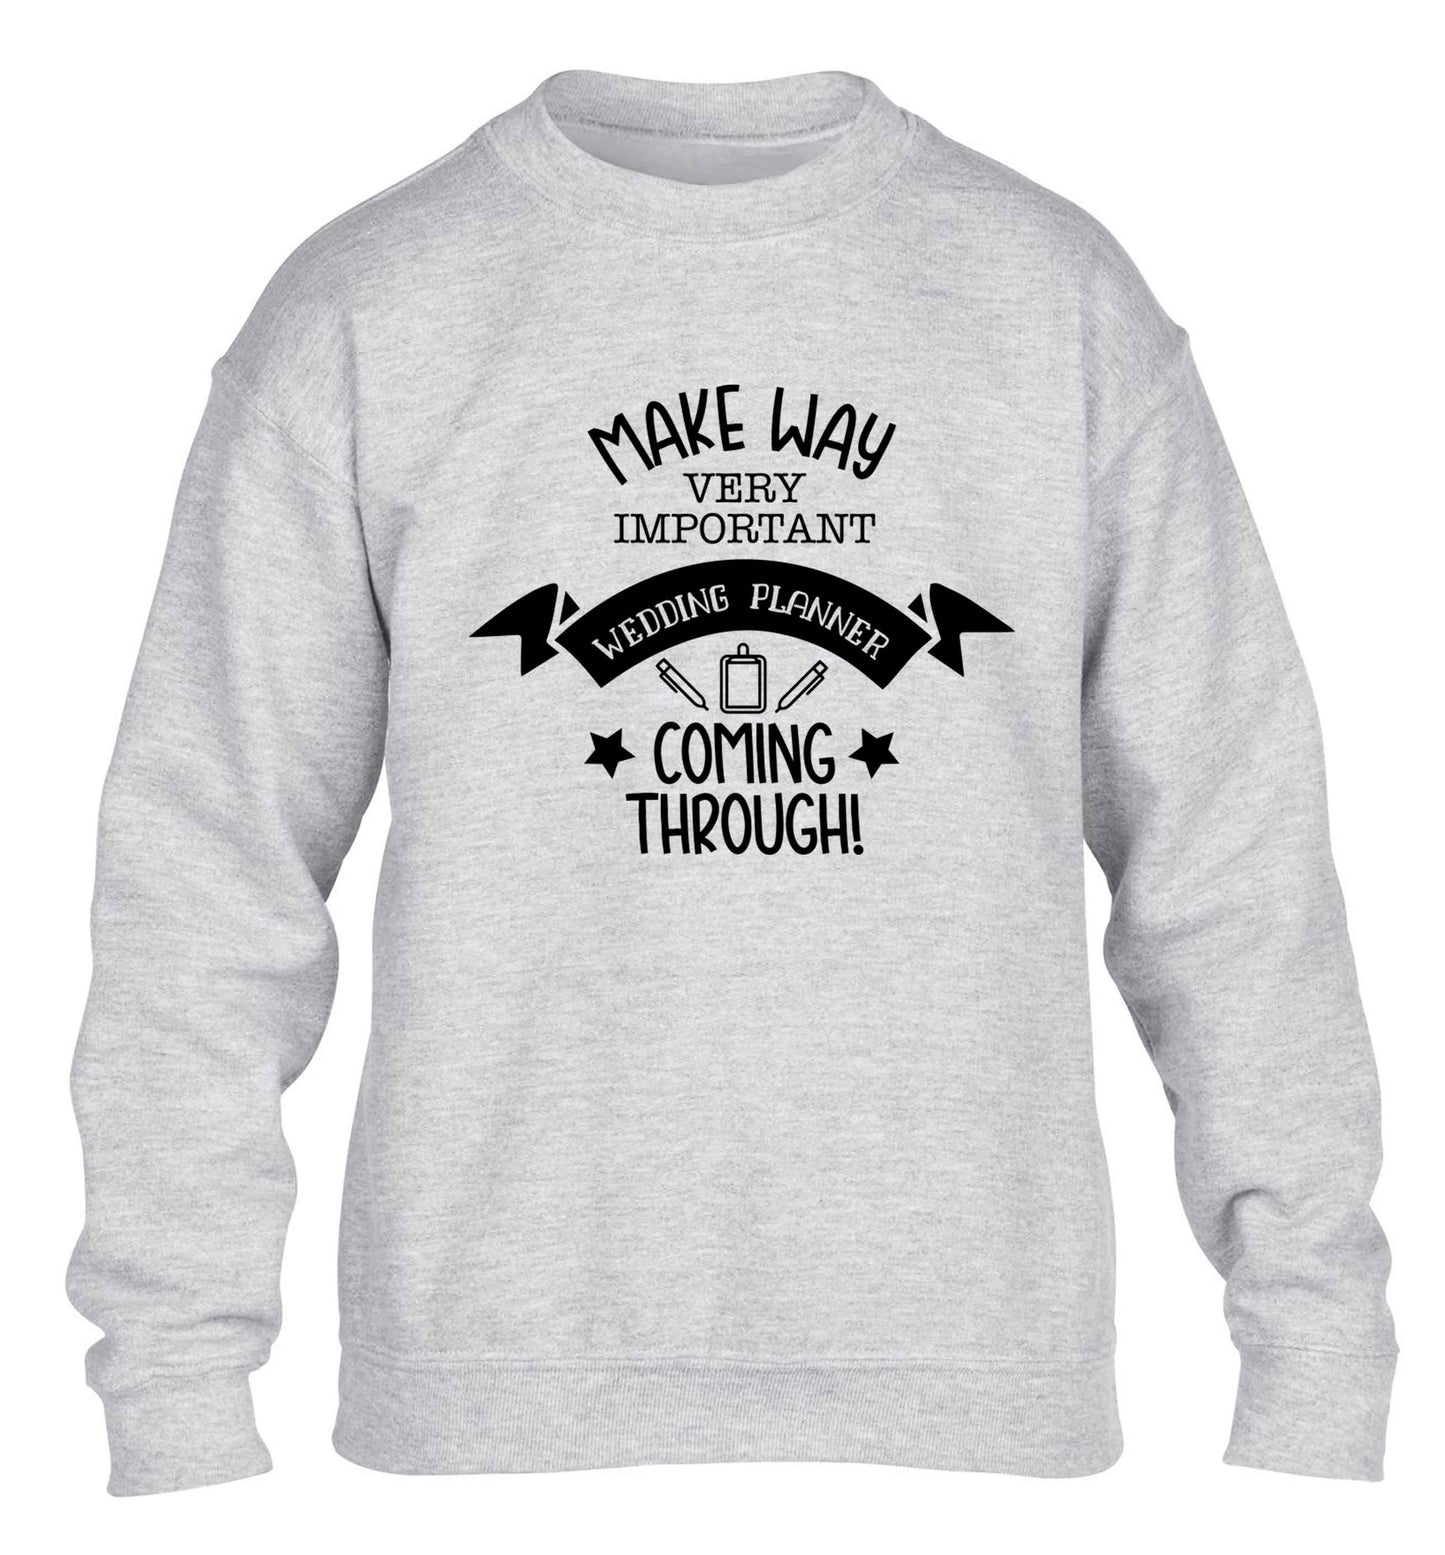 Make way very important wedding planner coming through children's grey sweater 12-13 Years